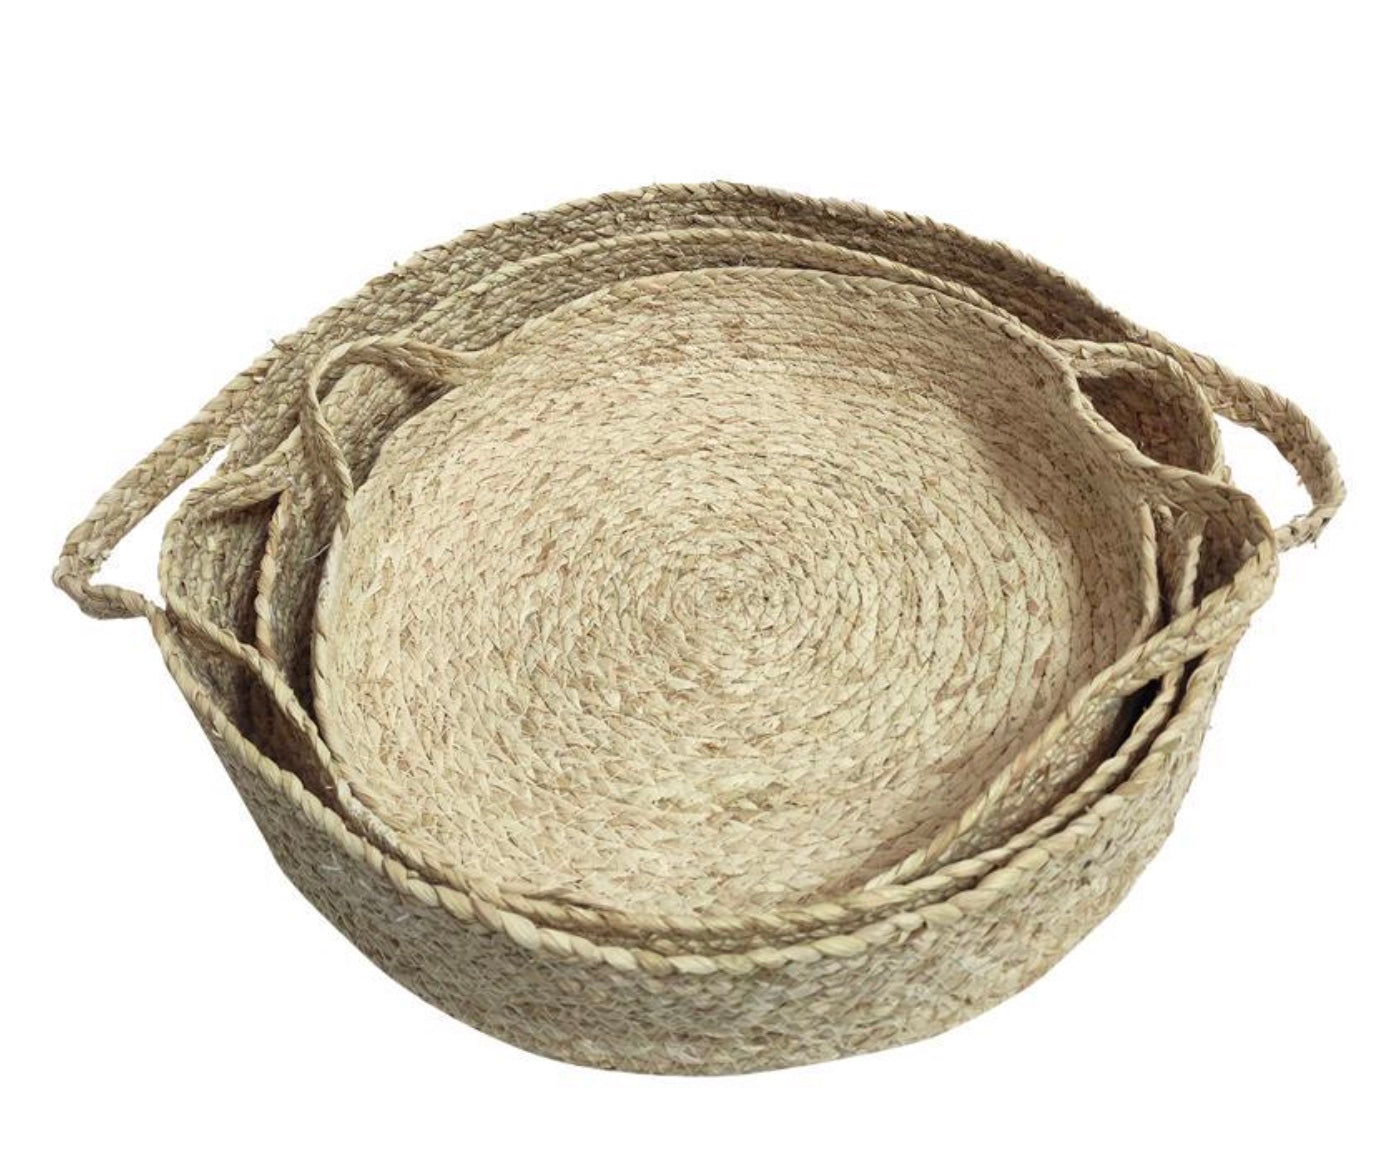 Woven Grass Tray Baskets (3 Sizes)